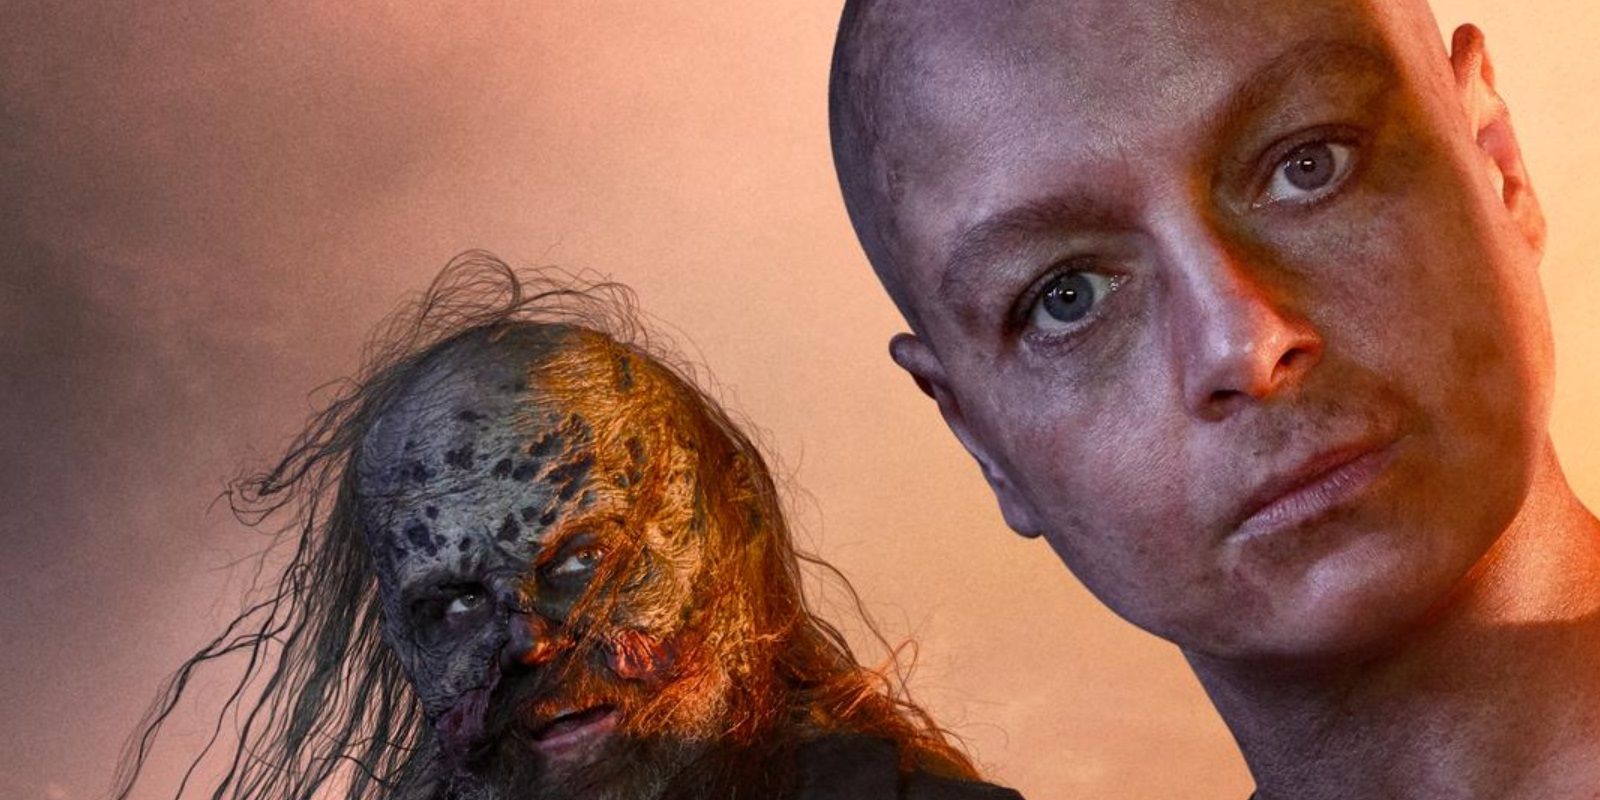 Alpha and Beta feature in The Walking Dead season 10 poster